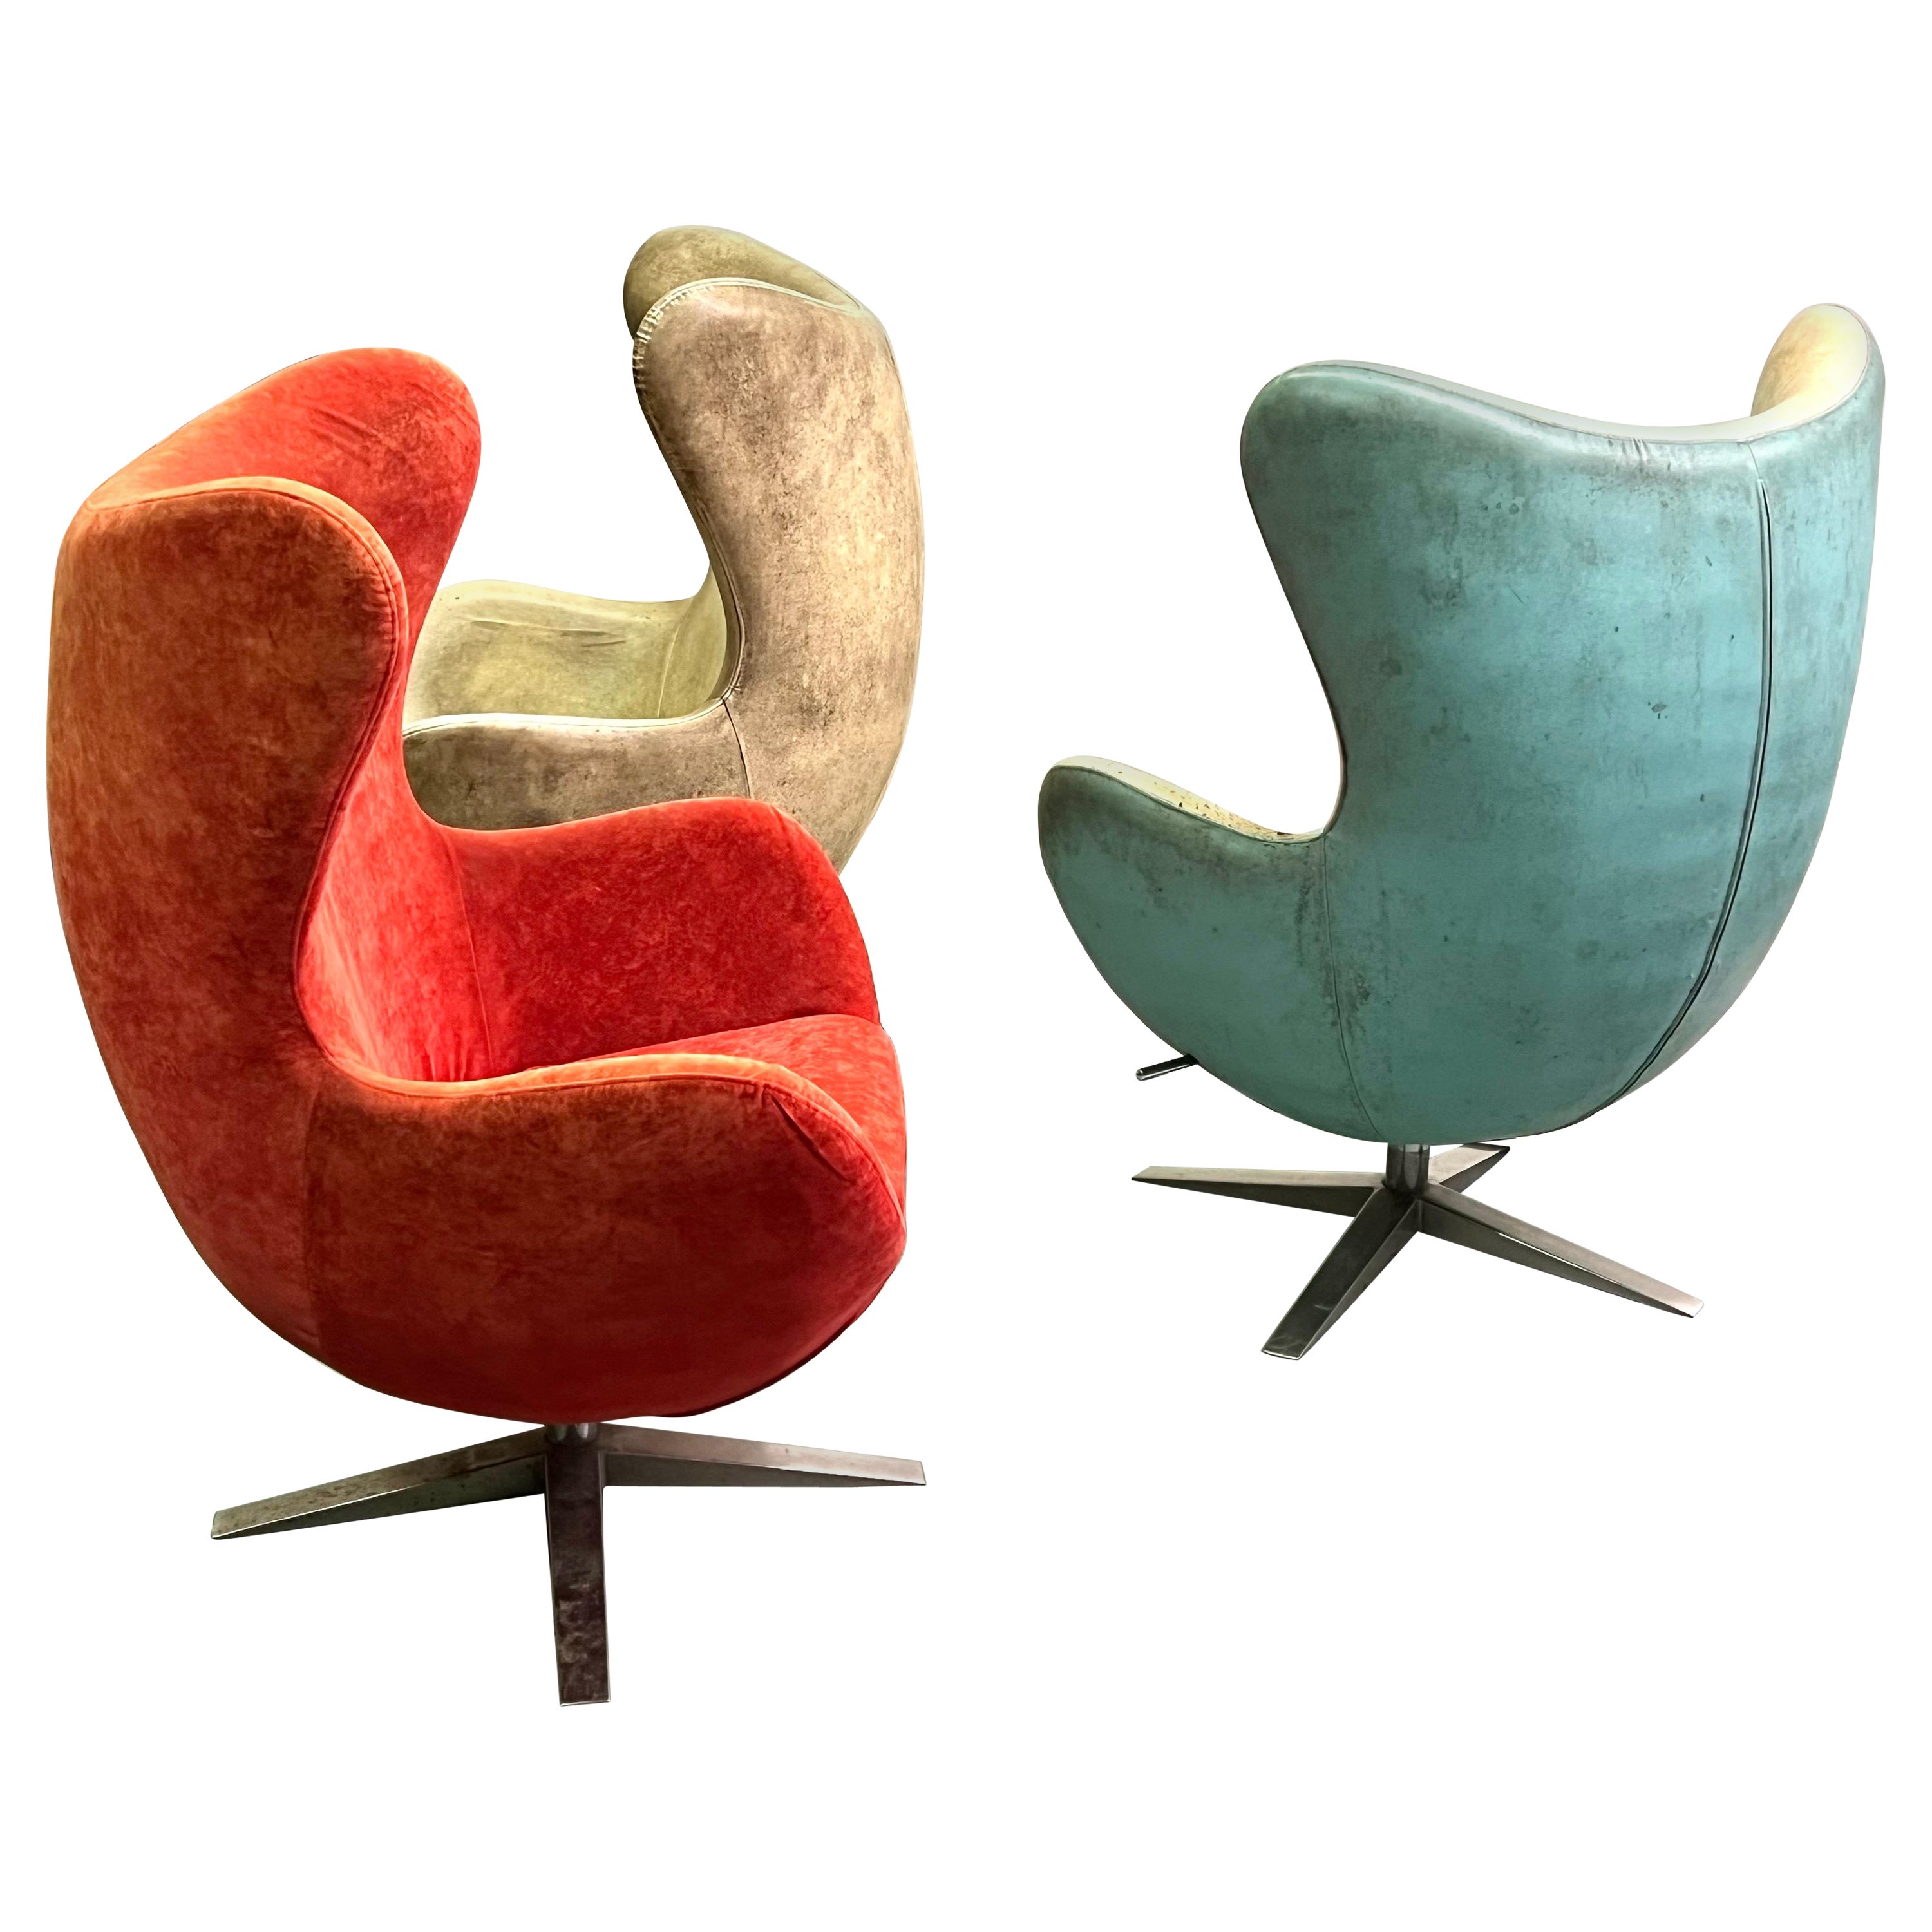 Set of 3 Danish Organic Modern Egg Lounge Chairs attr. Arne Jacobsen, 2 Leather  For Sale